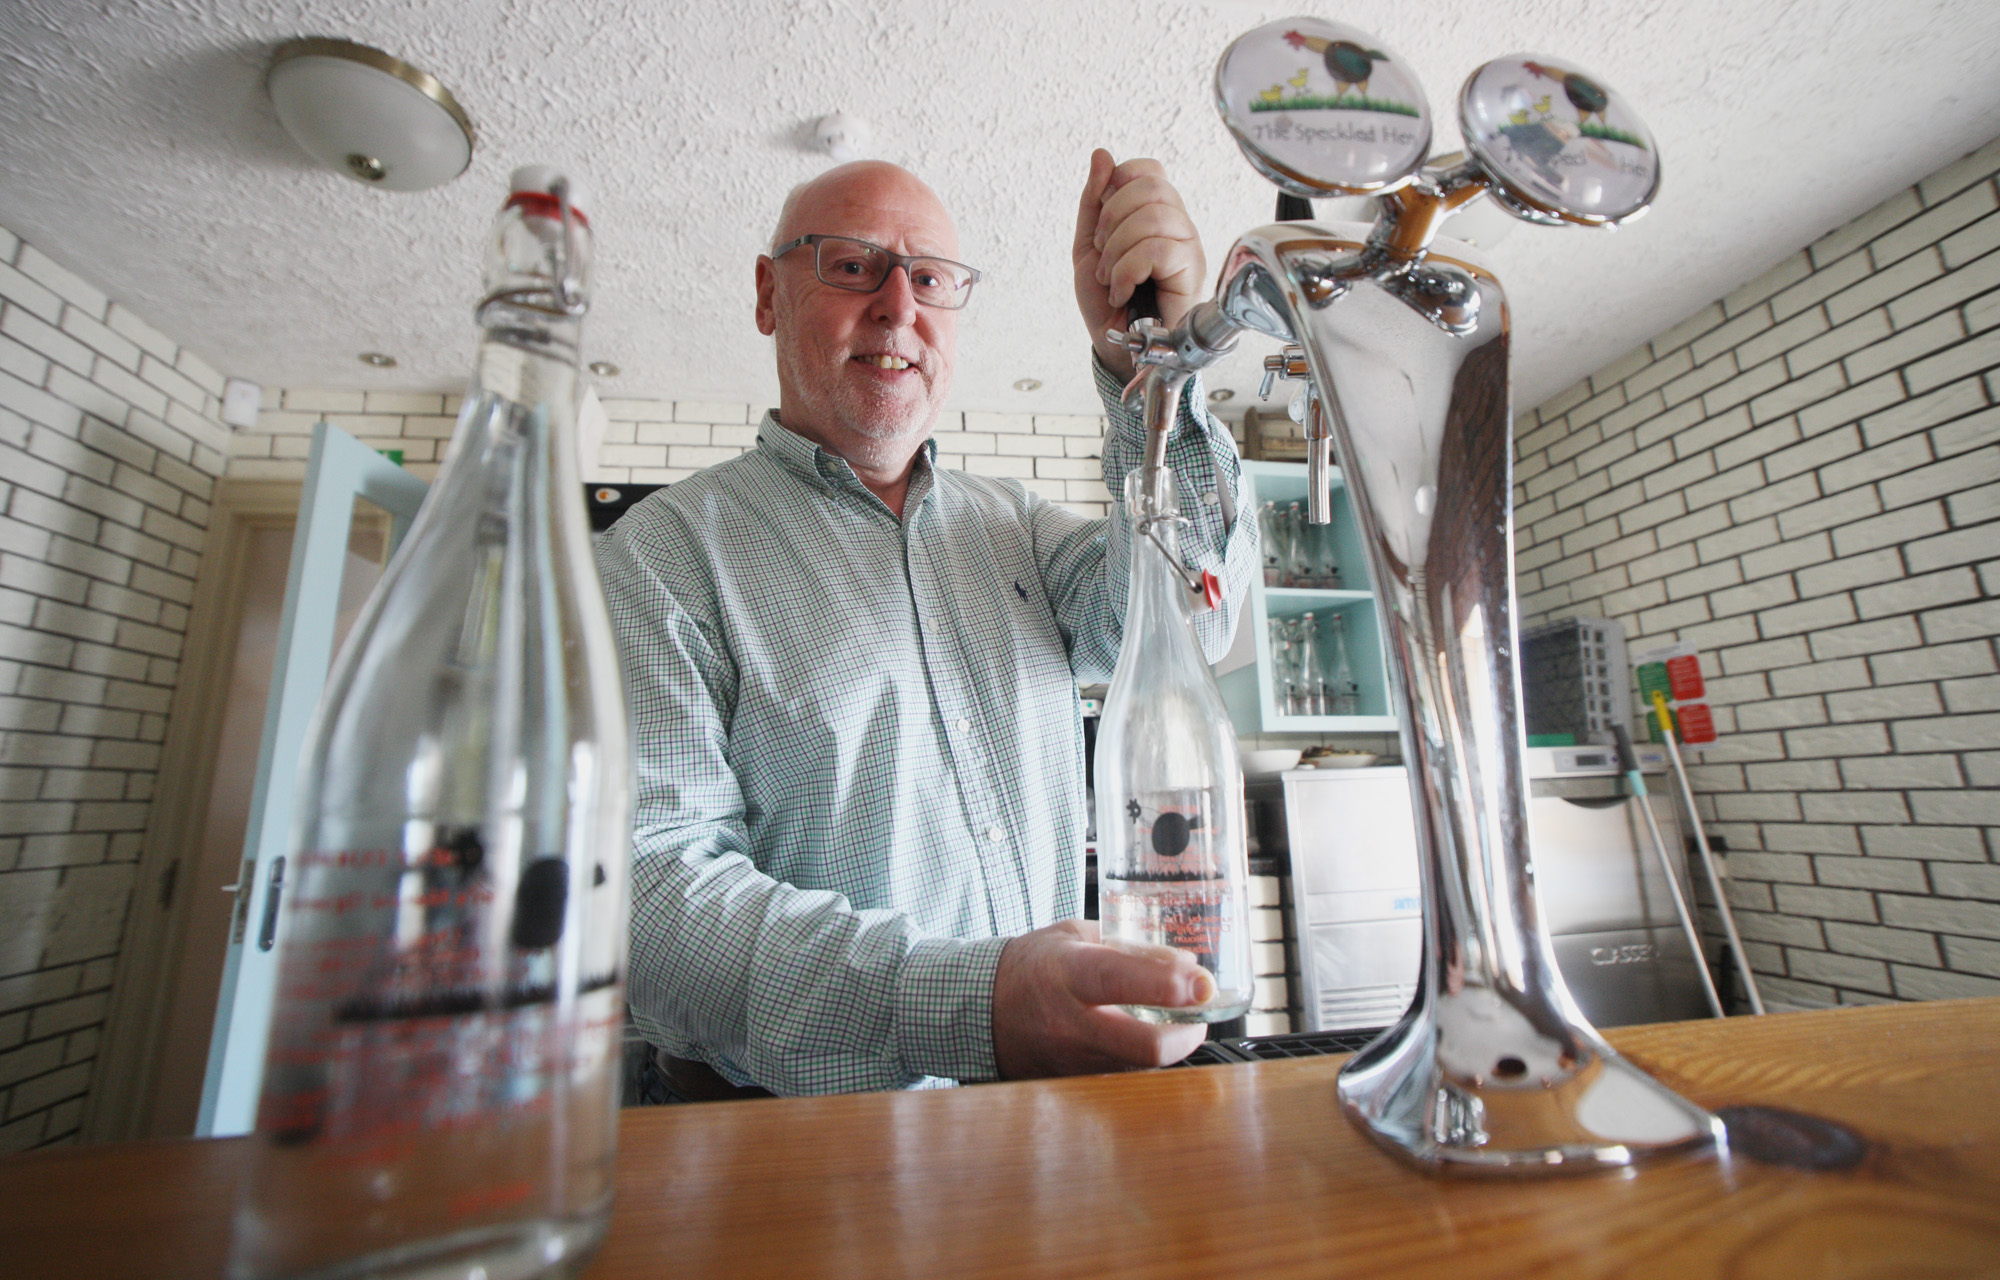 NOW THAT’S FRESH: Martin Caldwell serves up some of the crisp water at The Speckled Hen\n